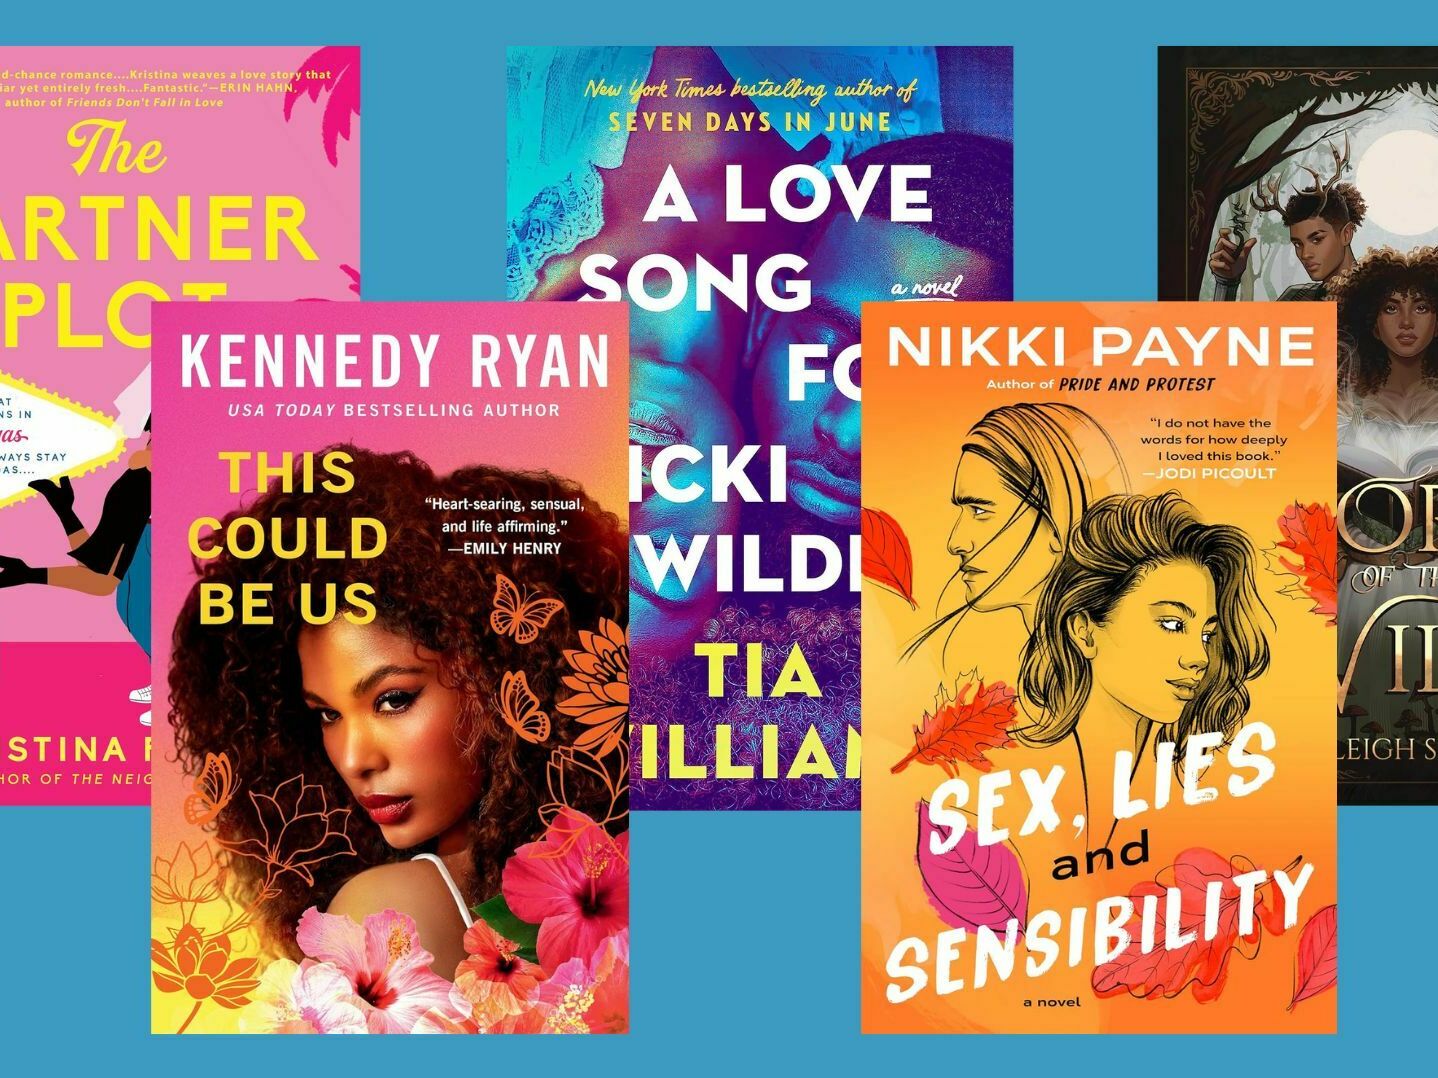 Kennedy Ryan’s new novel, plus 4 other new romances by Black authors